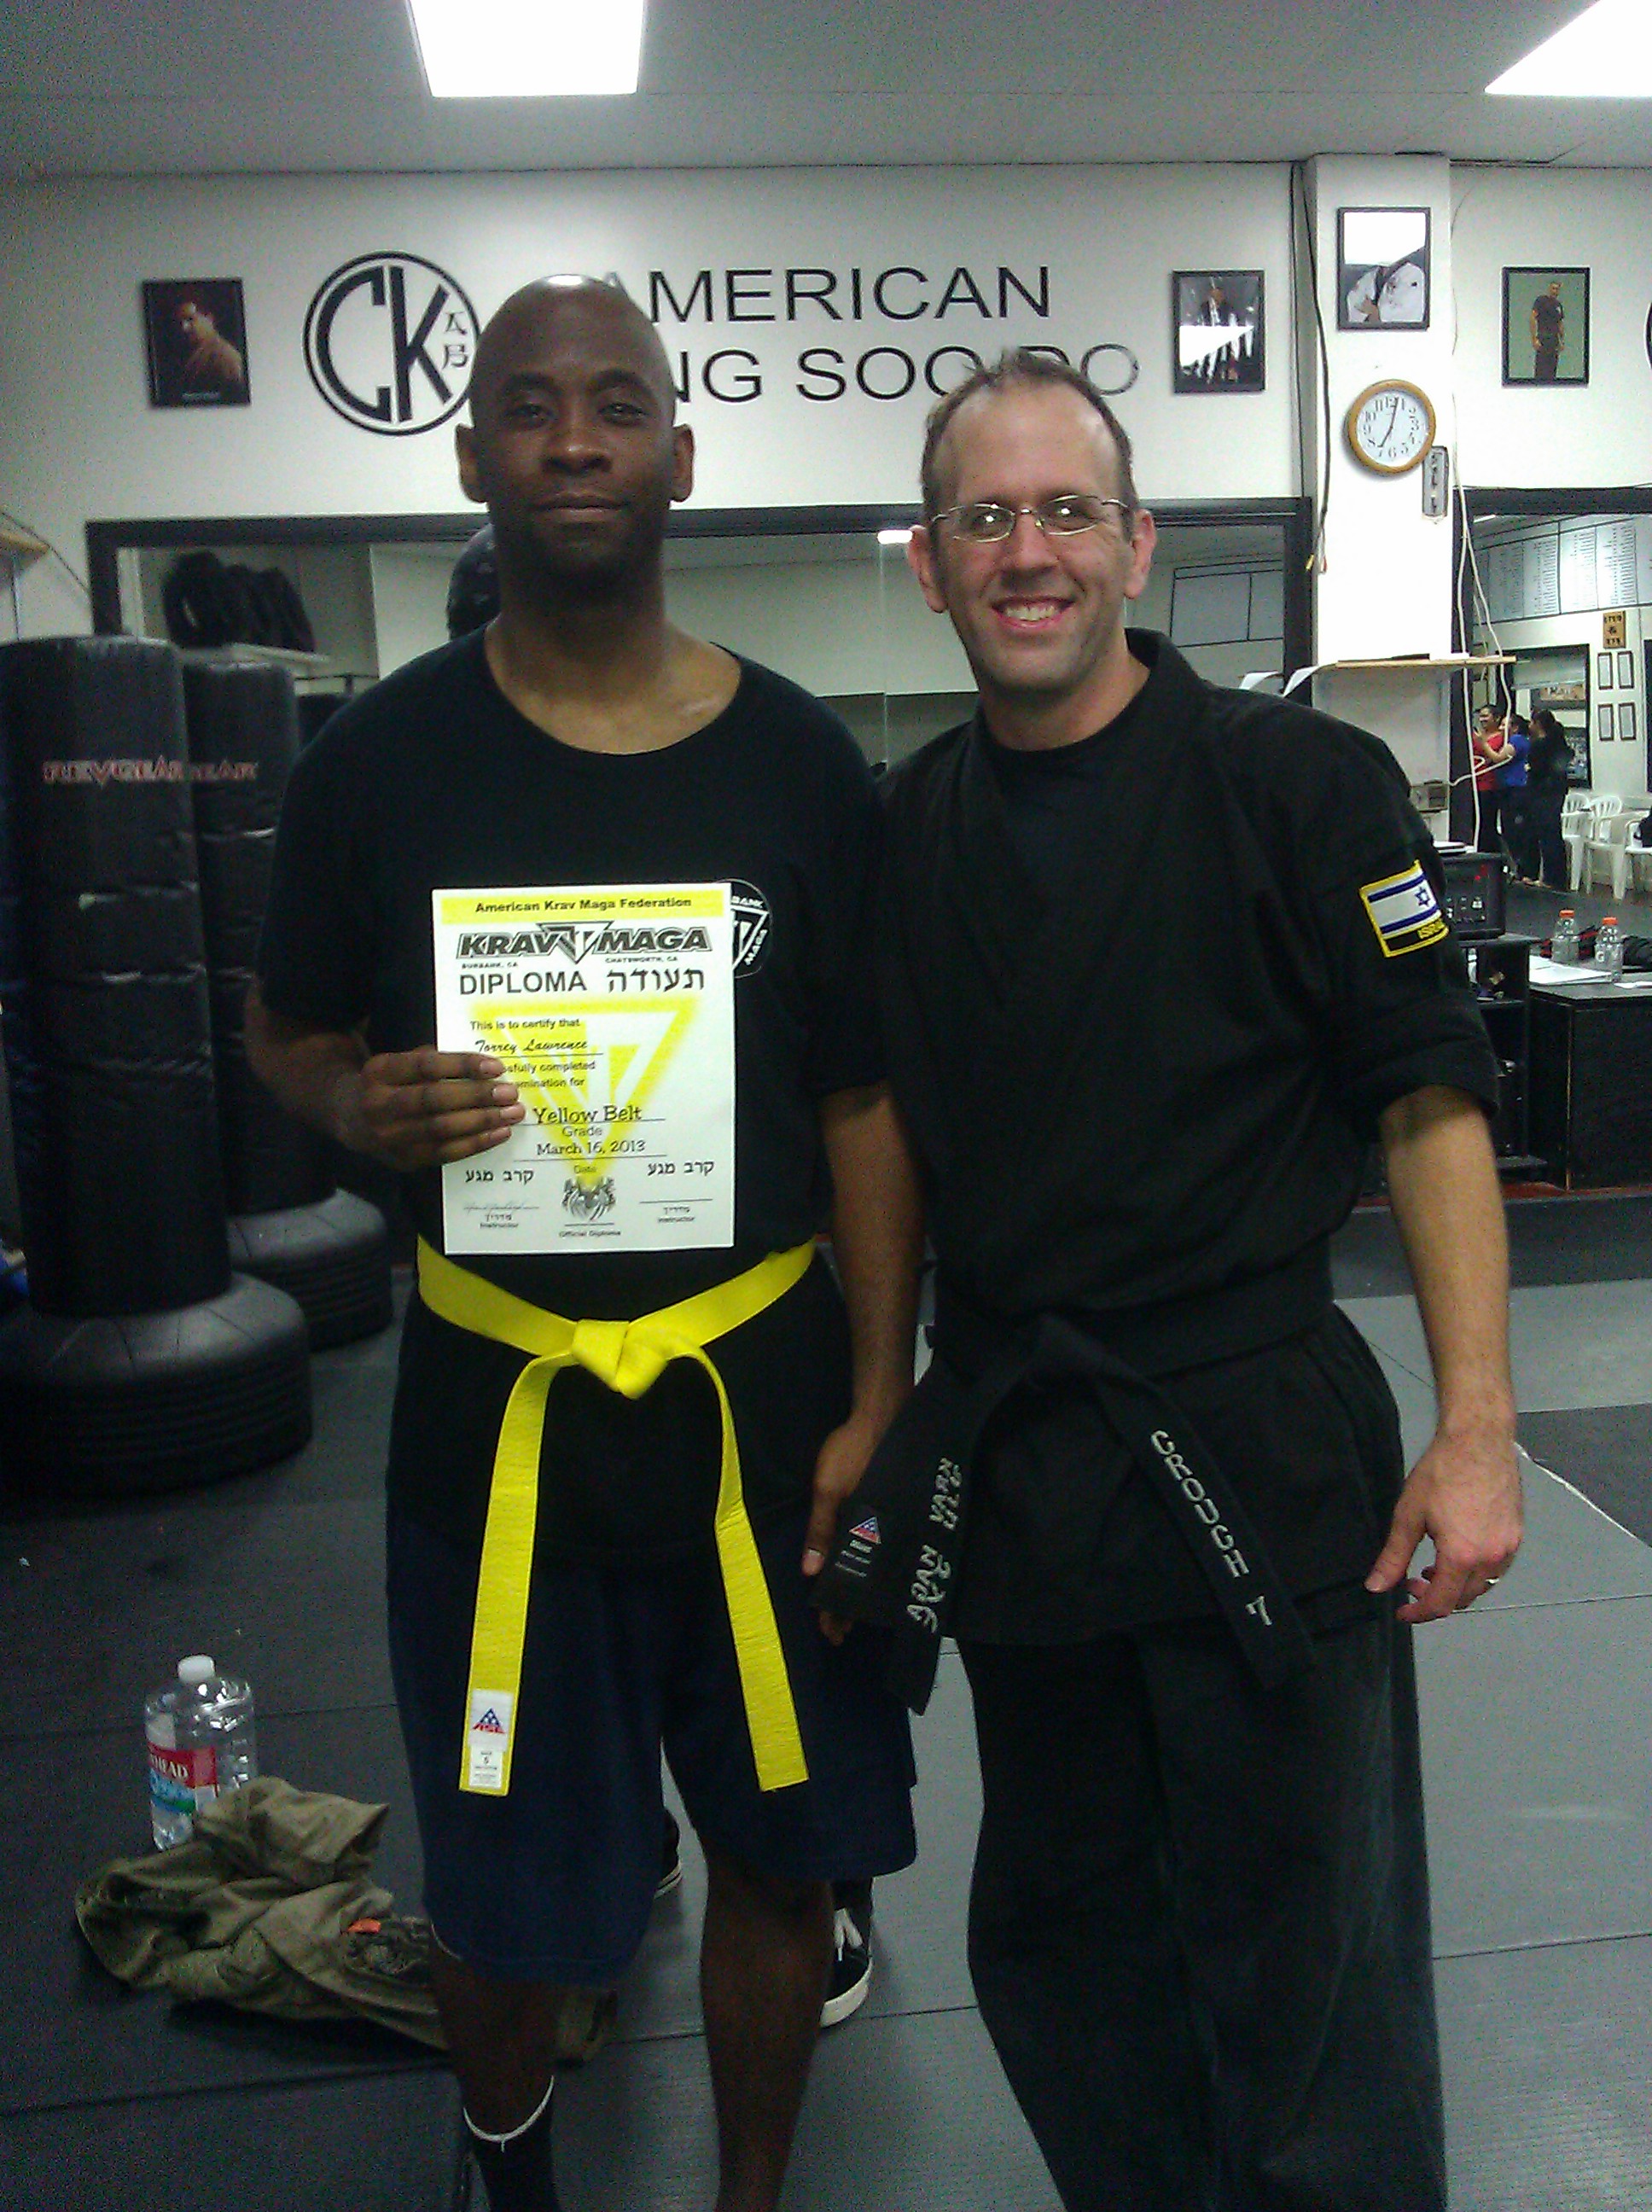 Torrey recieves his yellow belt in Krav Maga in March 2013 with his instrcutor Chris Crouch.